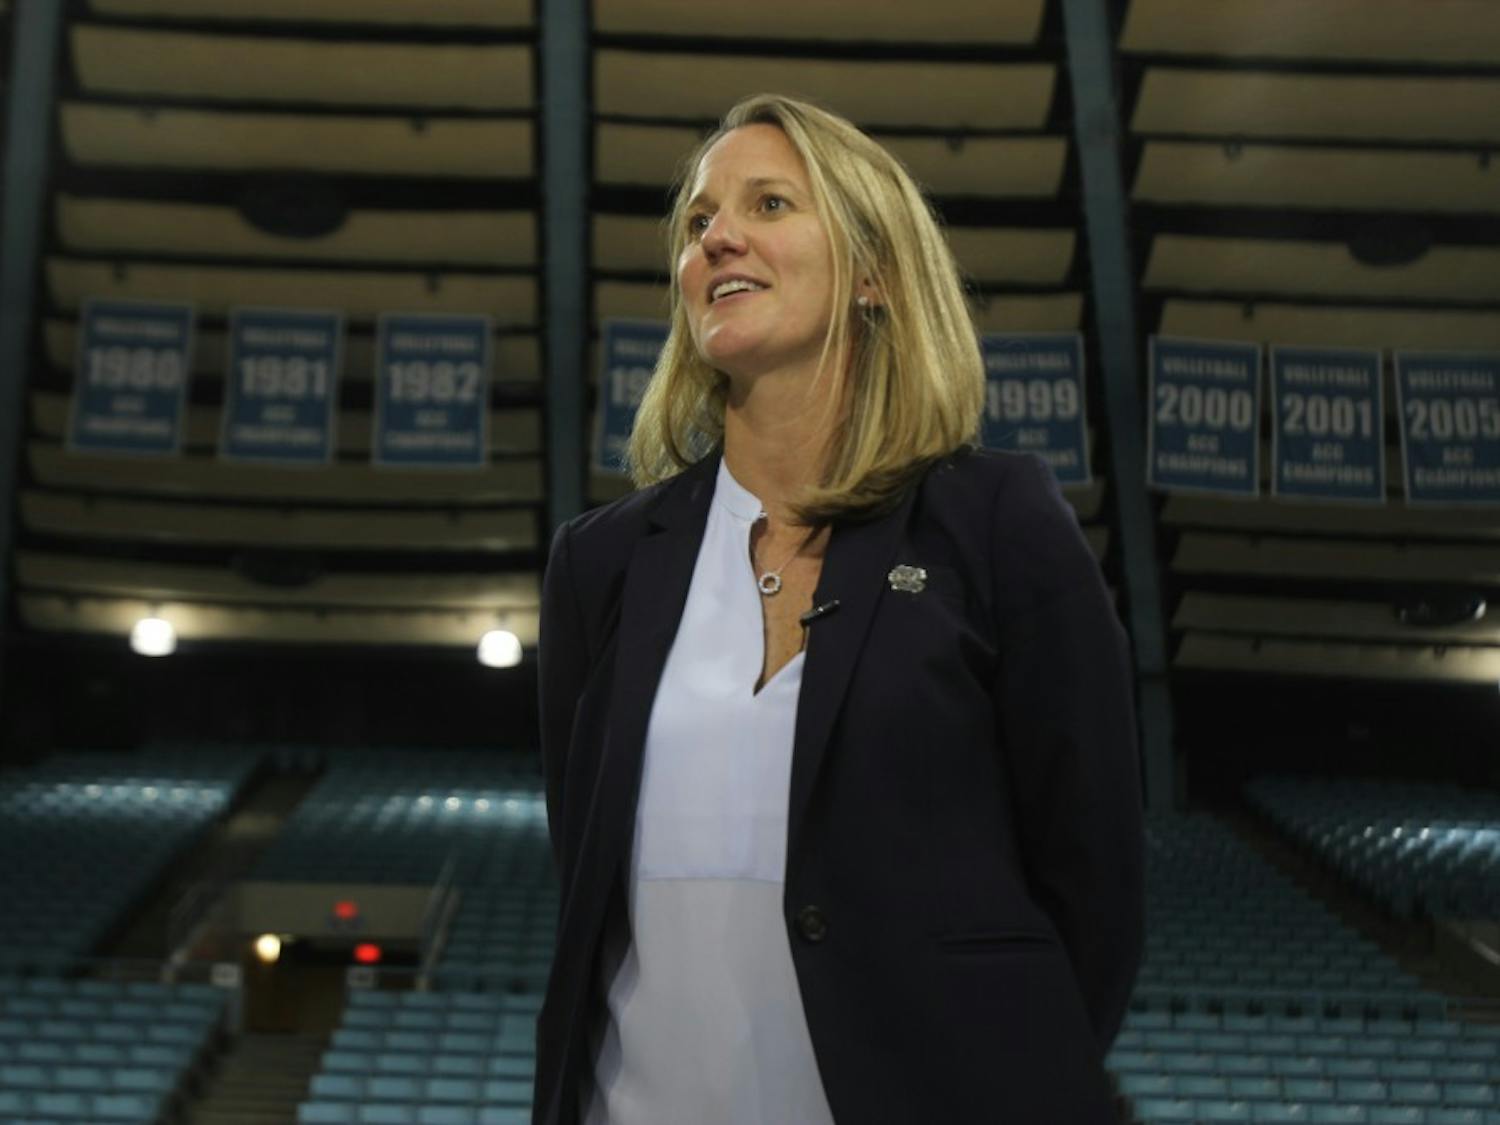 Courtney Banghart, the newly hired UNC women's basketball head coach, spoke at a small press conference in Carmichael Arena about her hopes for the program on May 1, 2019.